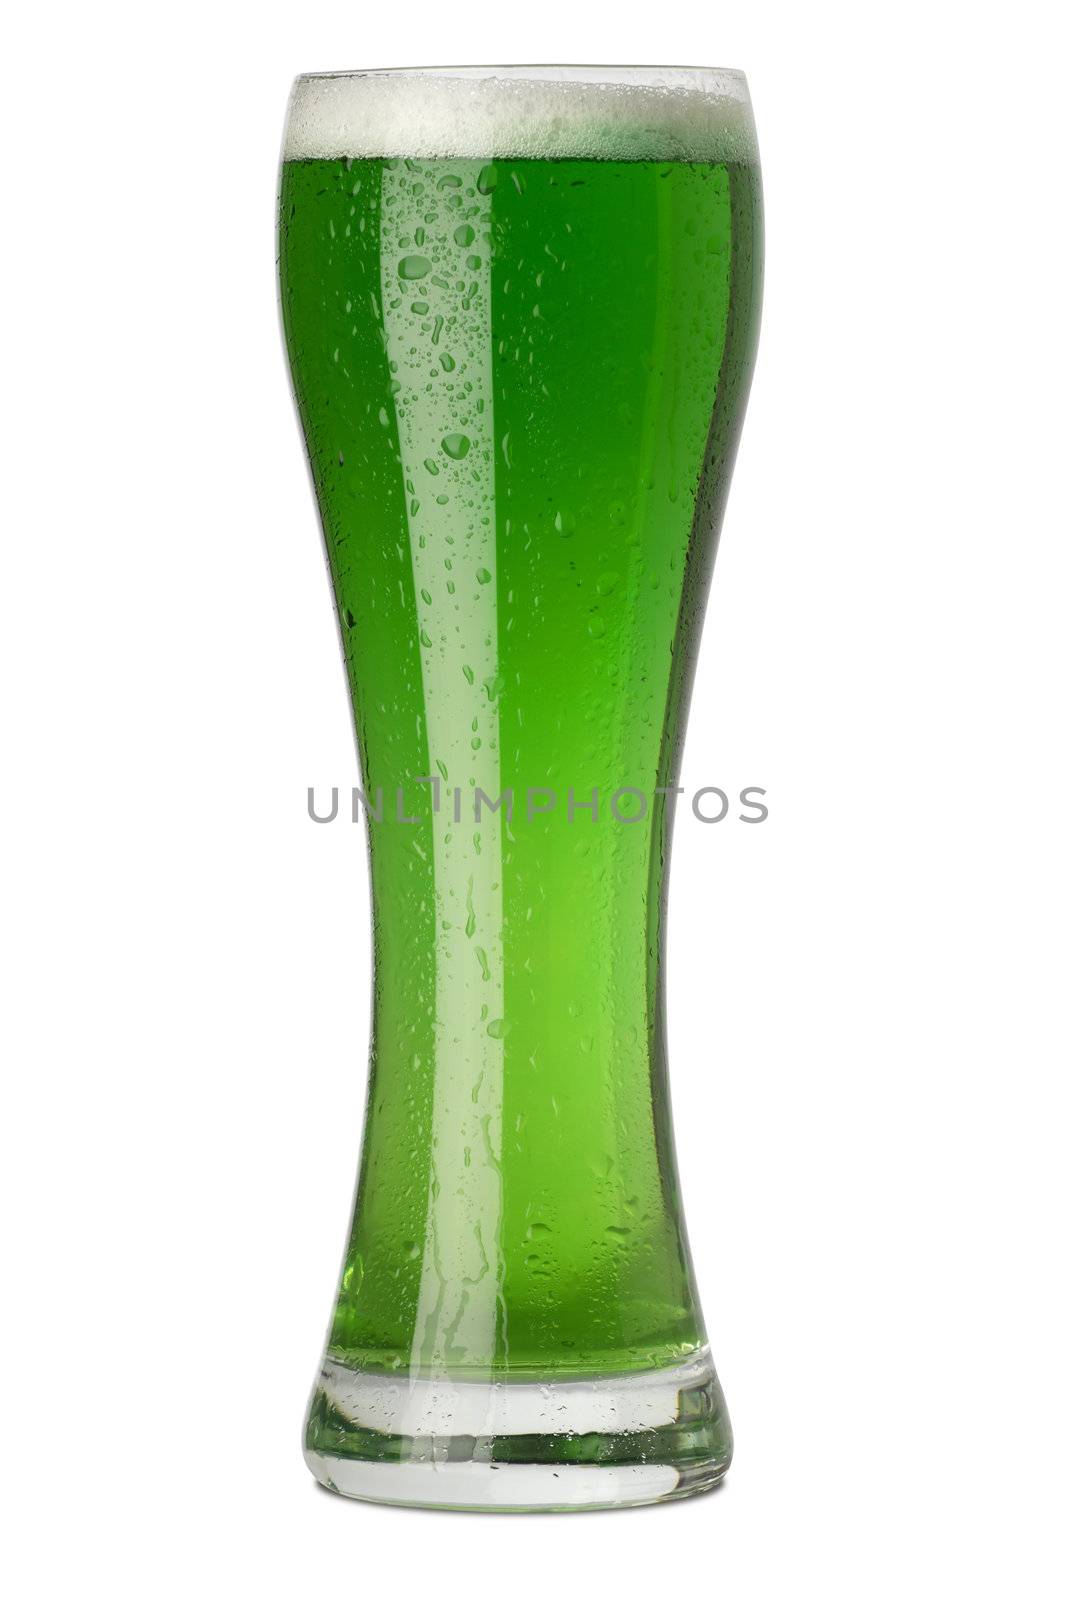 Photo of a tall glass of green beer for St. Patrick's Day.